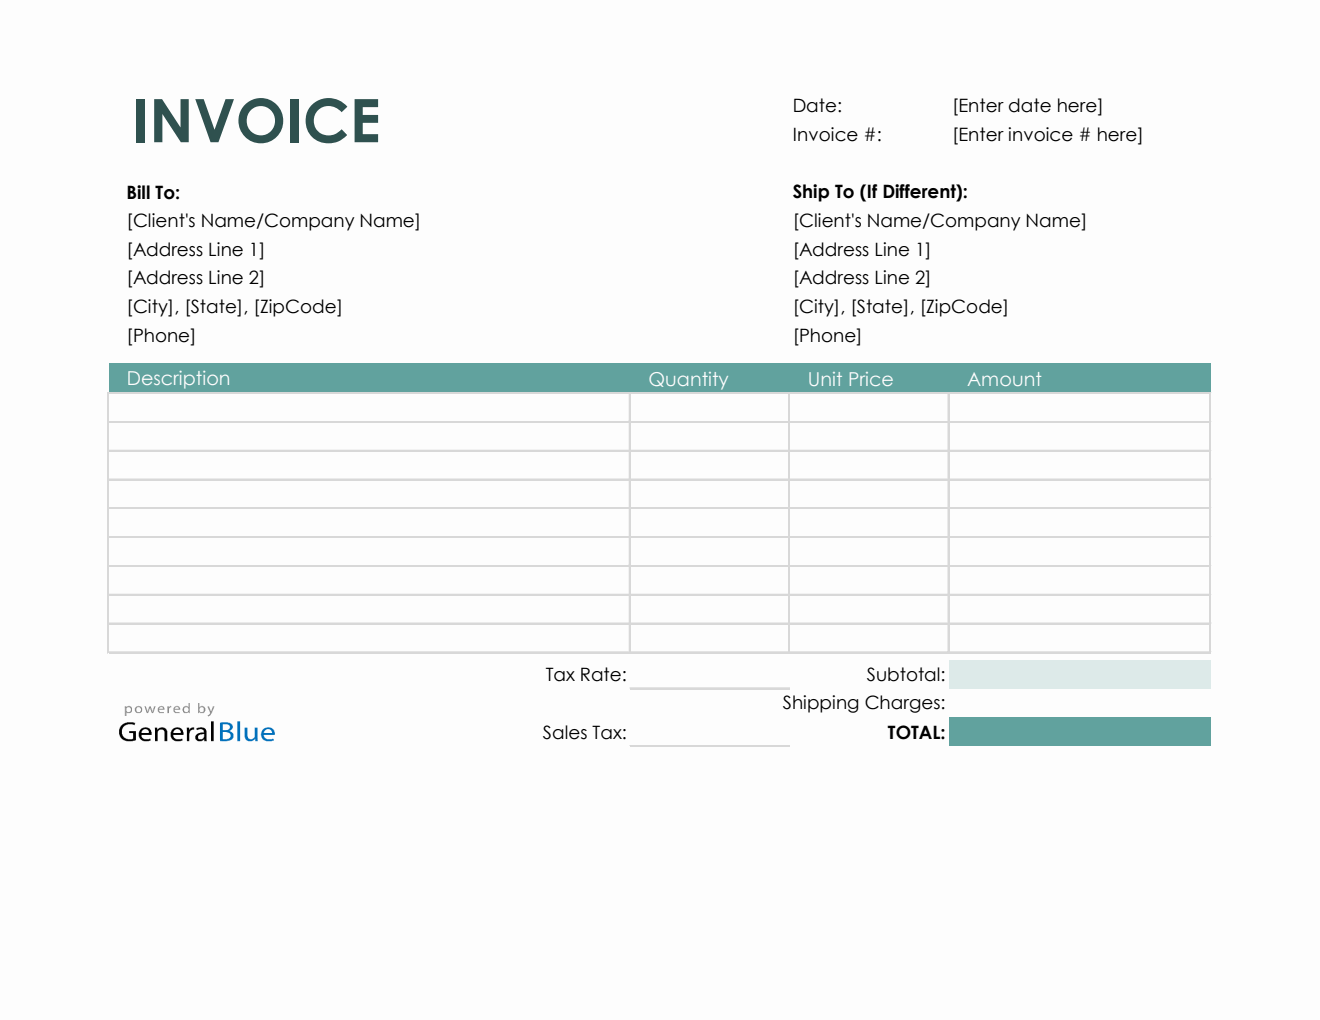 Purchase Invoice in Excel (Colorful)